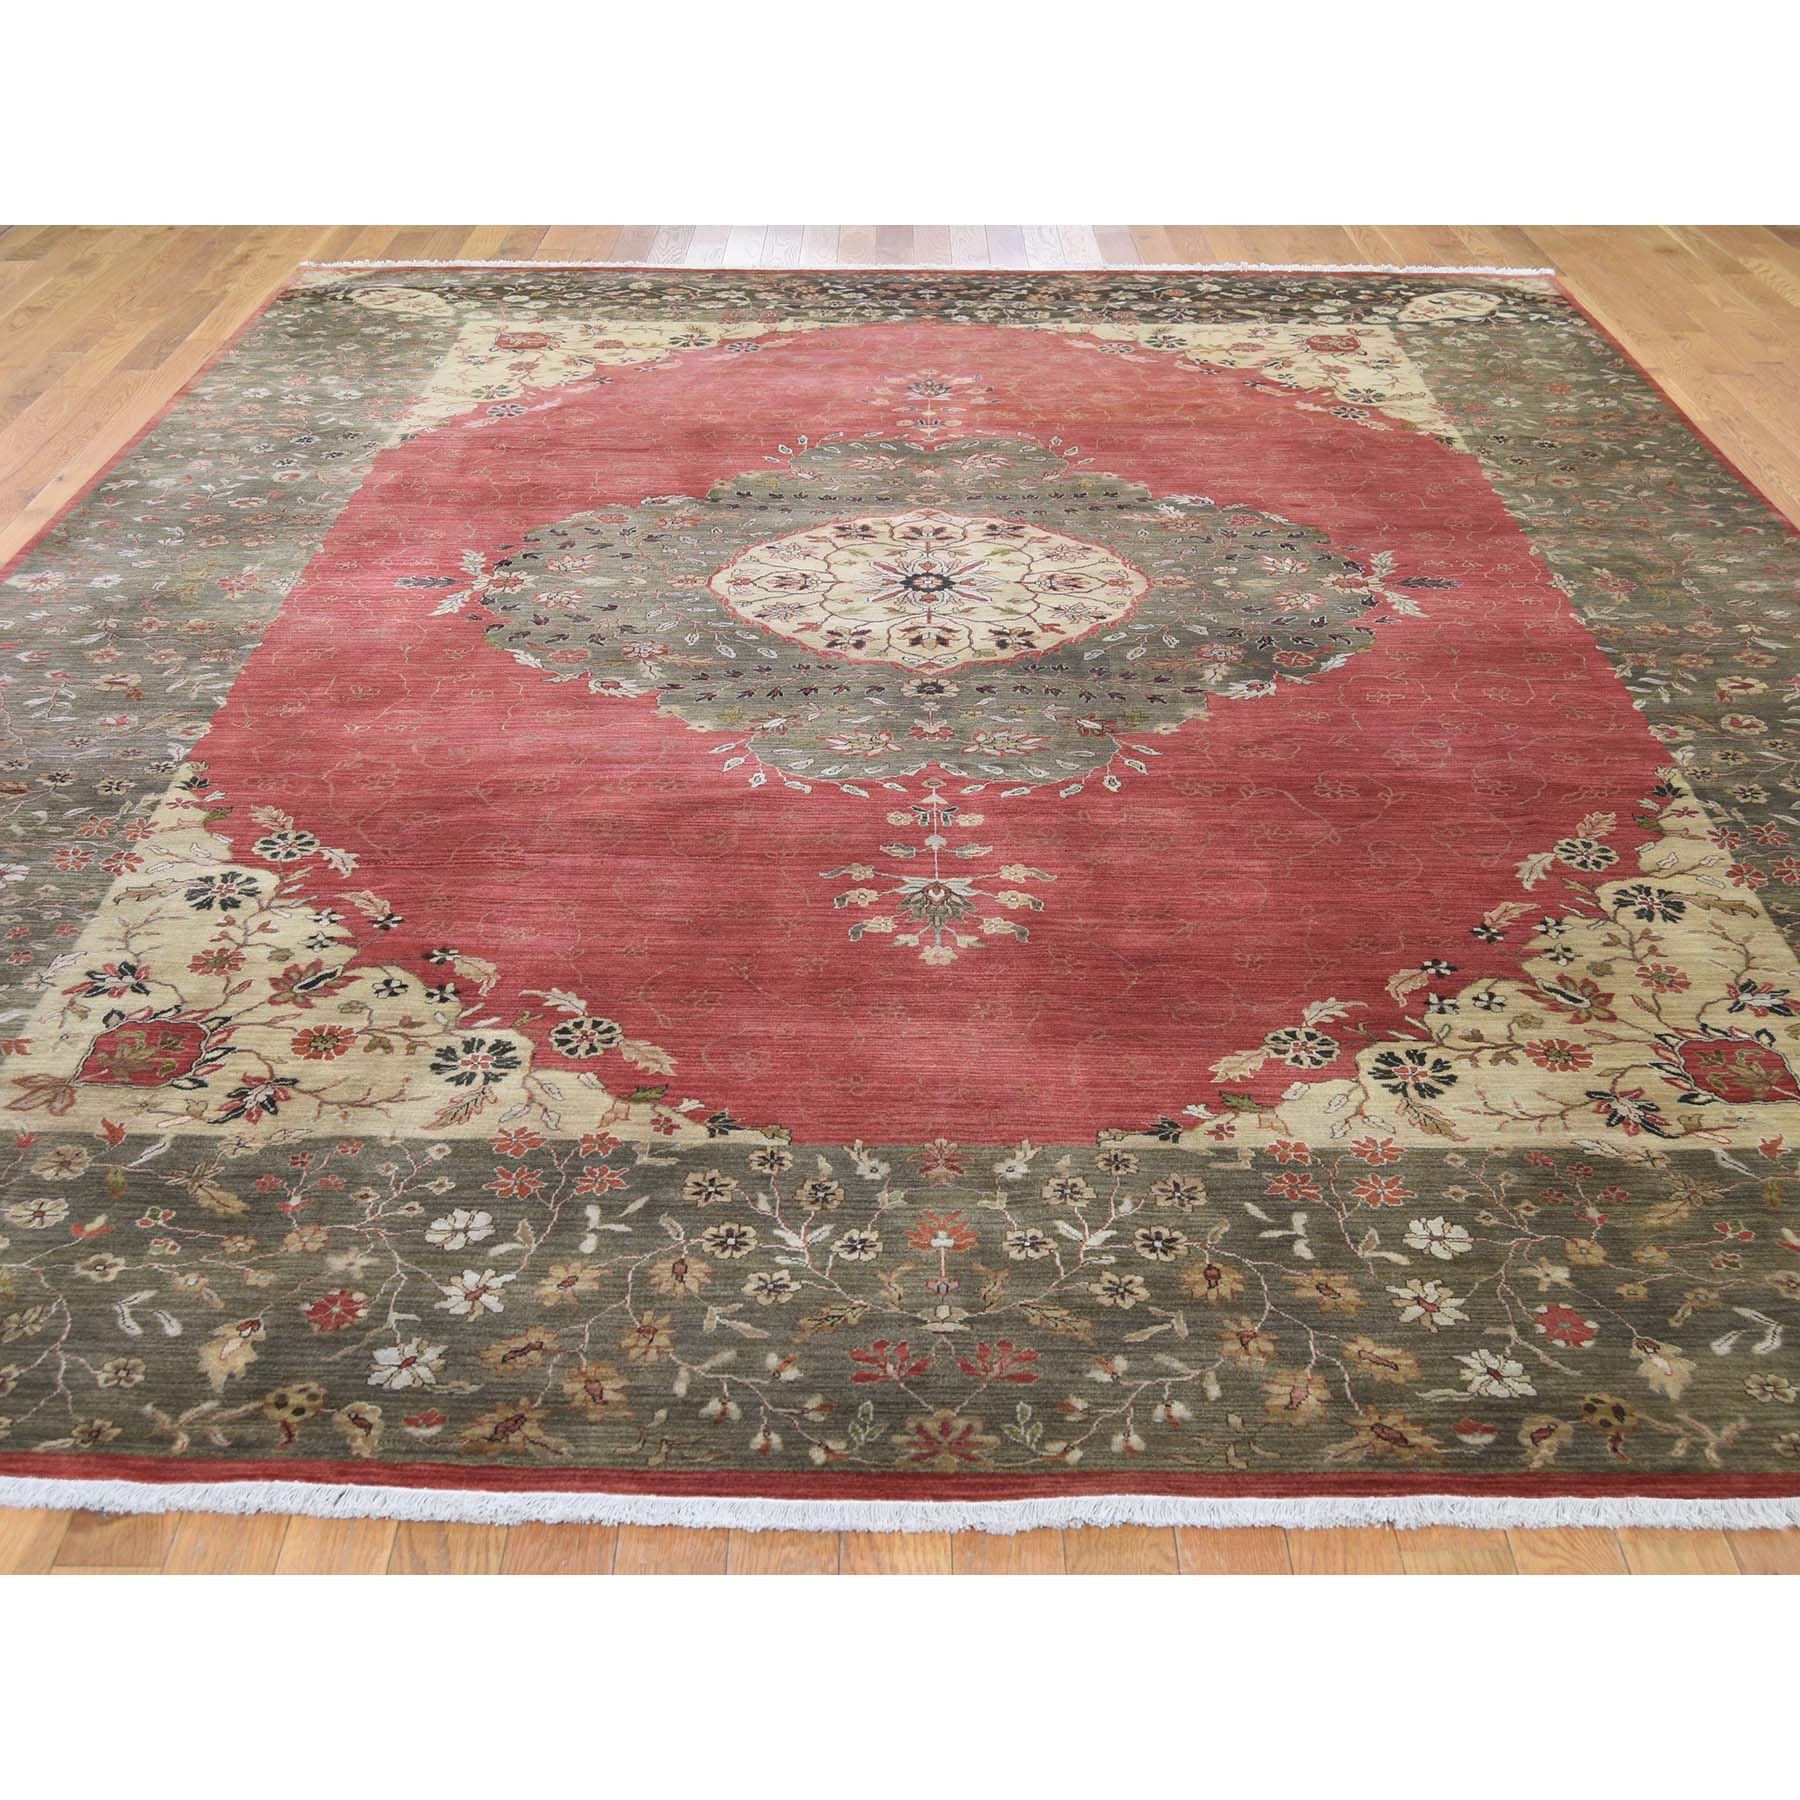 9-x12-2  Red,Antiqued Tabriz 300 KPSI Vegetable Dyes Hand-Knotted Oriental Rug 